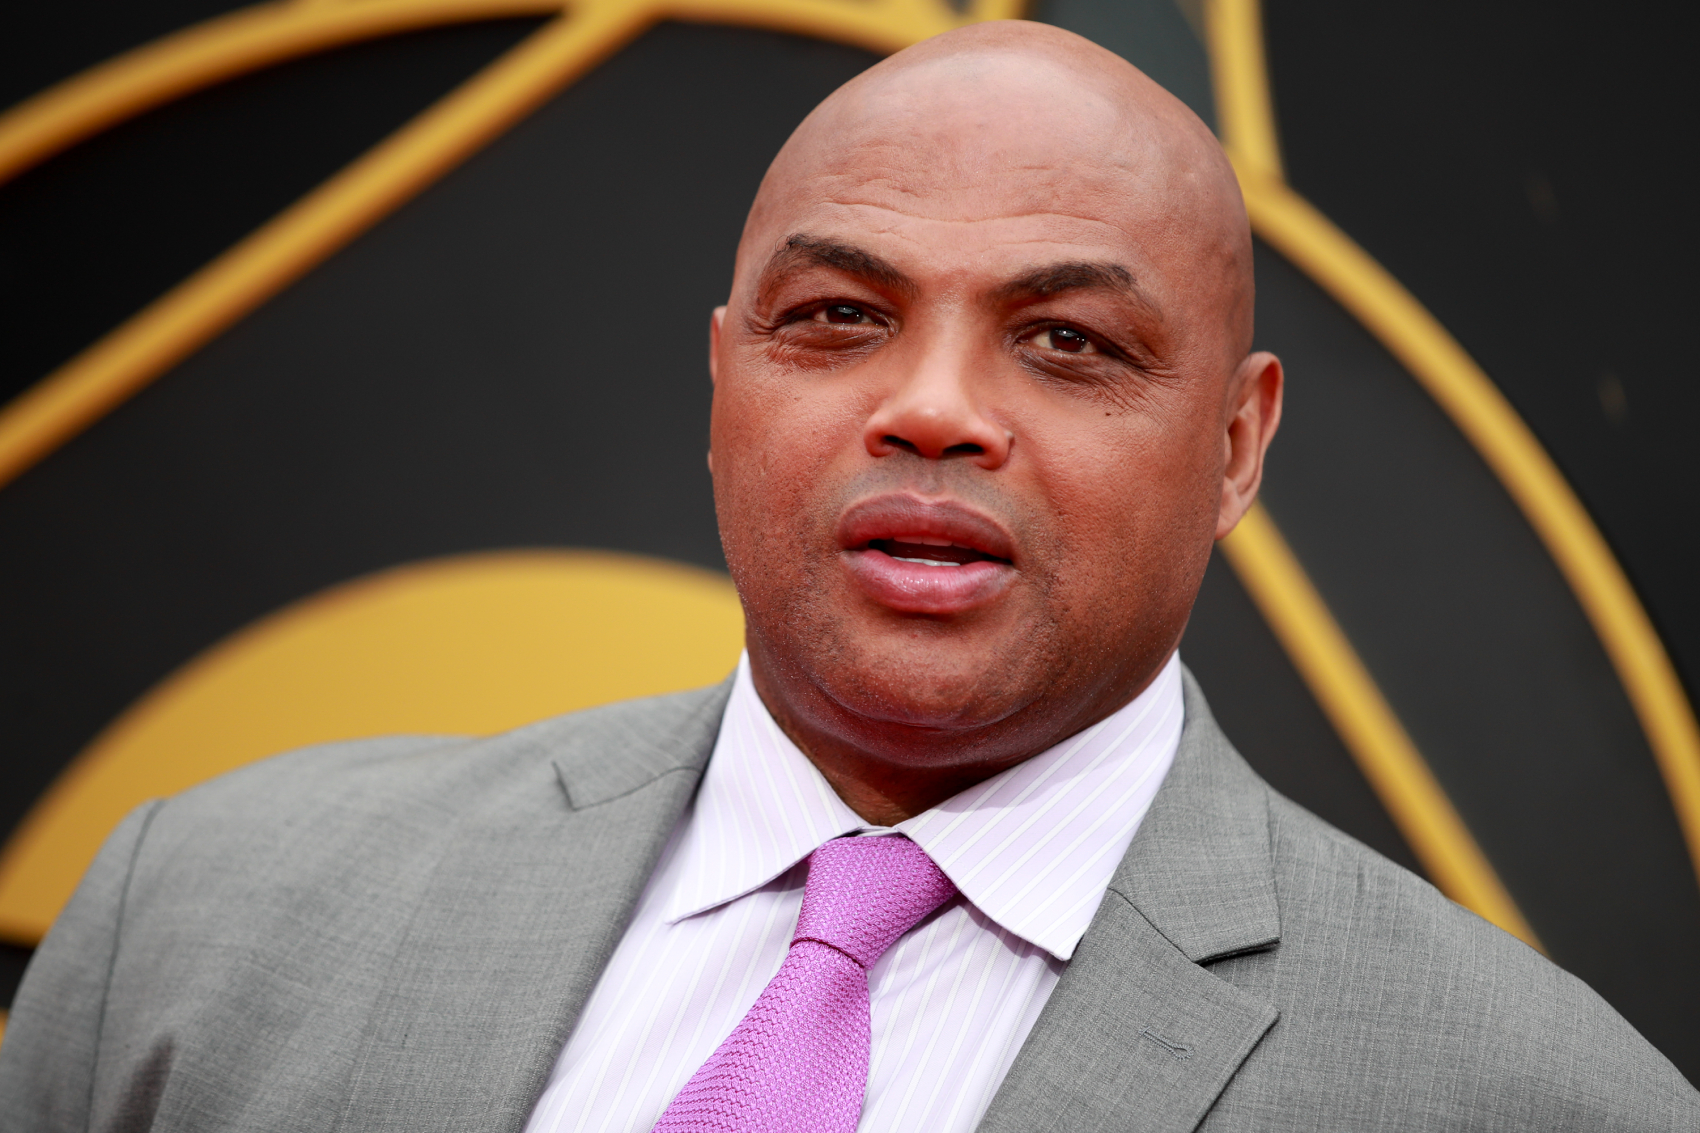 Following teams boycotting their NBA playoff games on Wednesday, NBA legend Charles Barkley appeared on CNN and gave a powerful message.